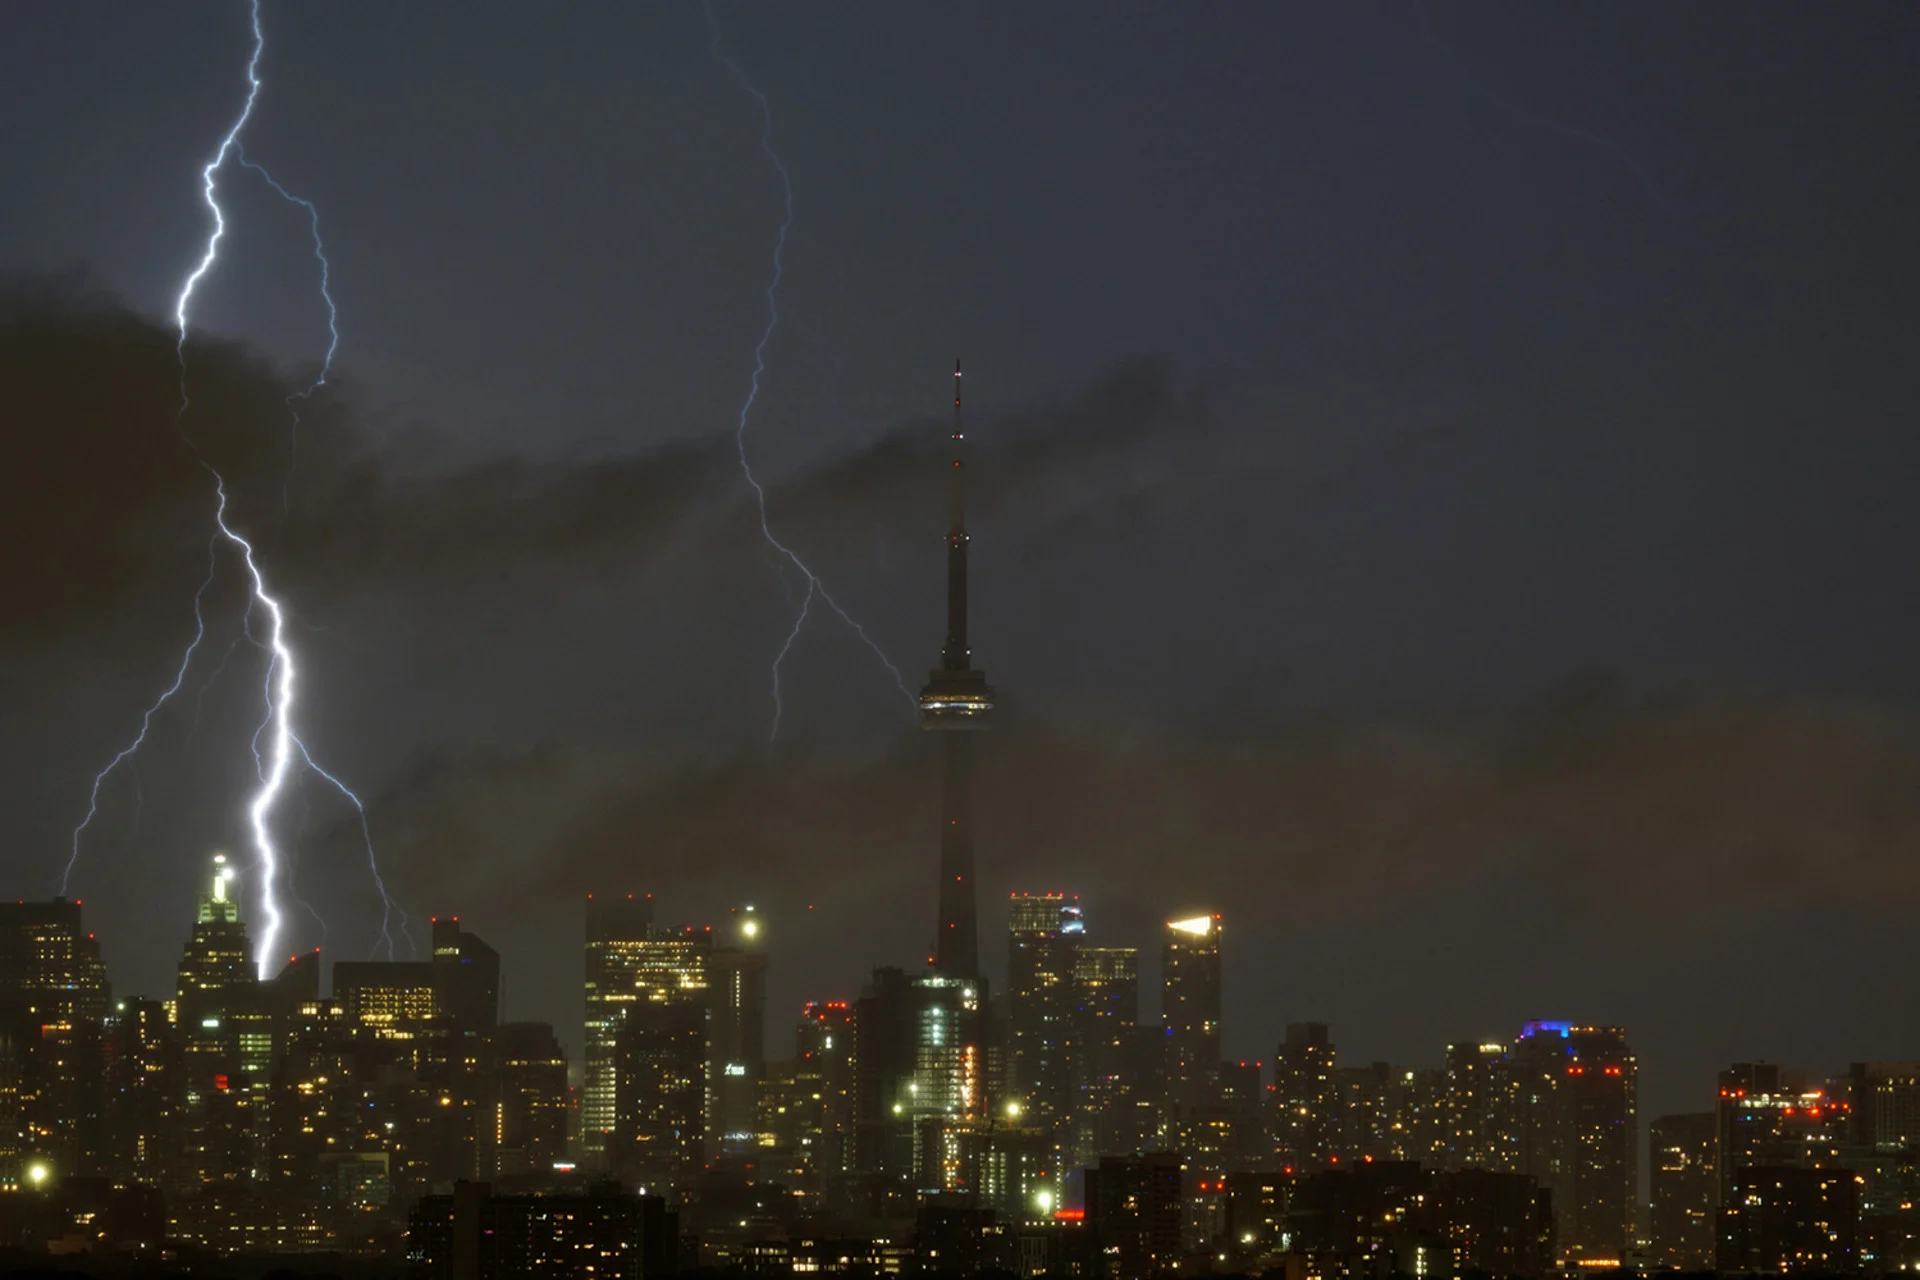 Southern Ontario faces overnight storm threat, summery Sunday